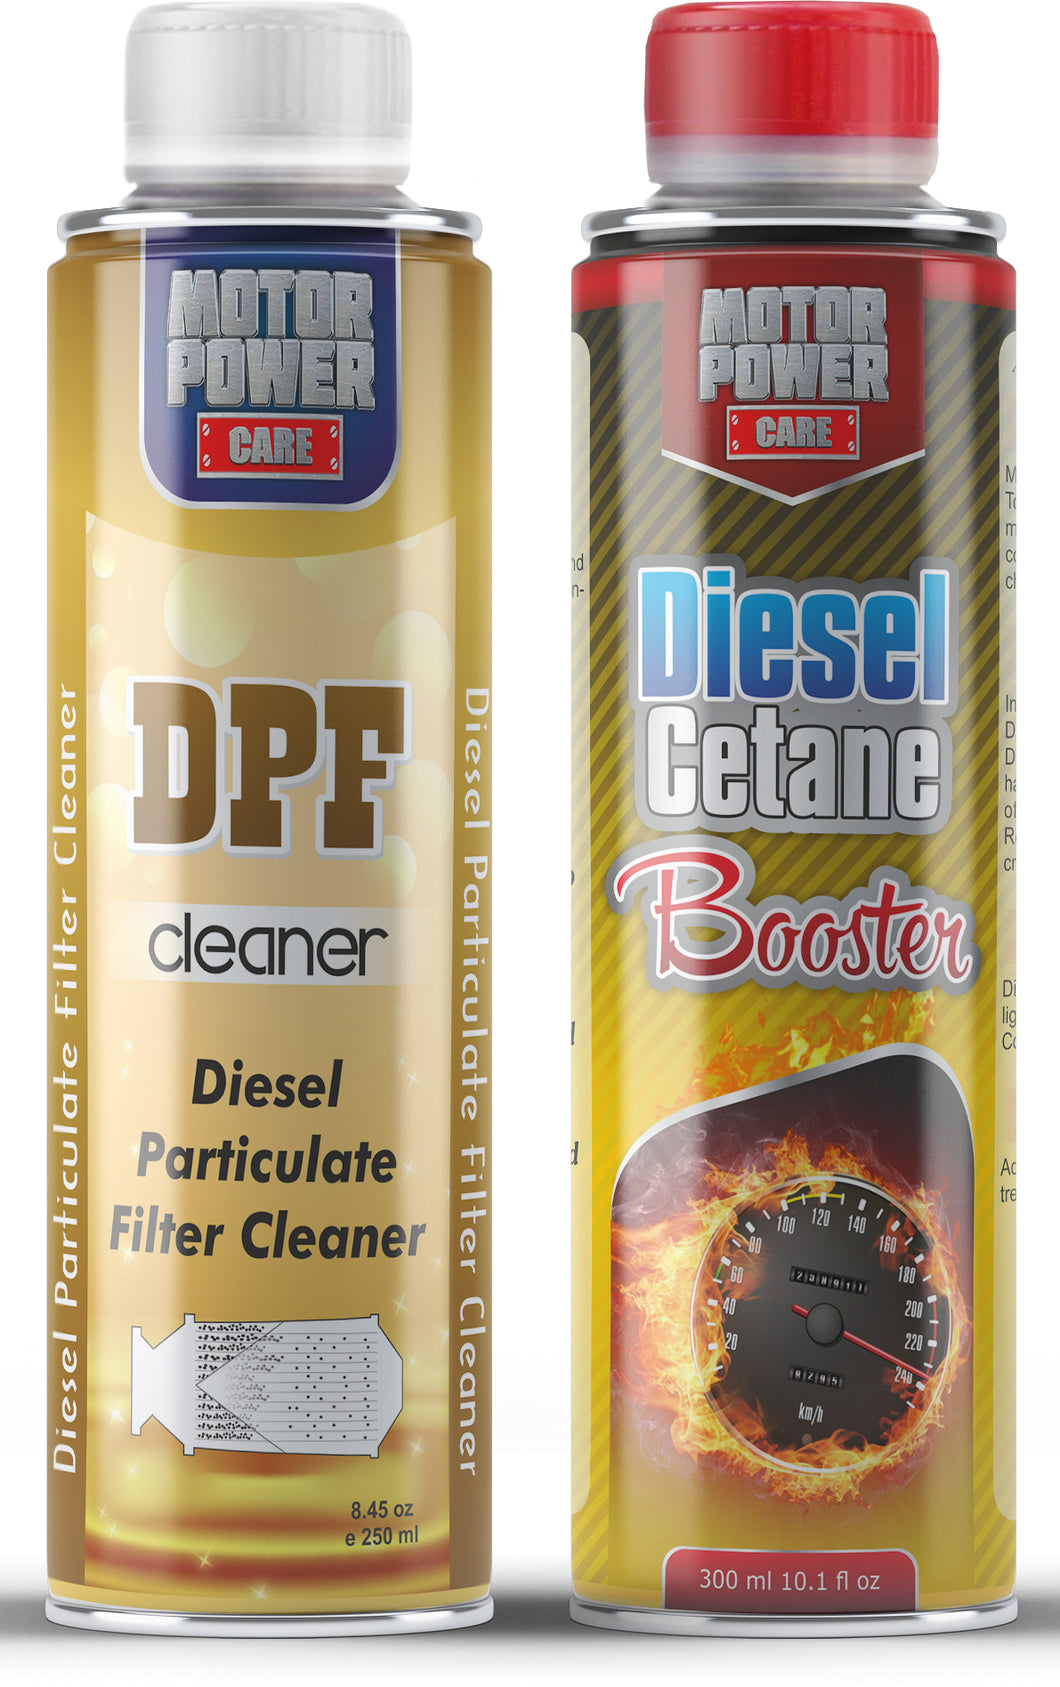 Diesel system treatment kit, DPF cleaner & Cetain Booster high performace